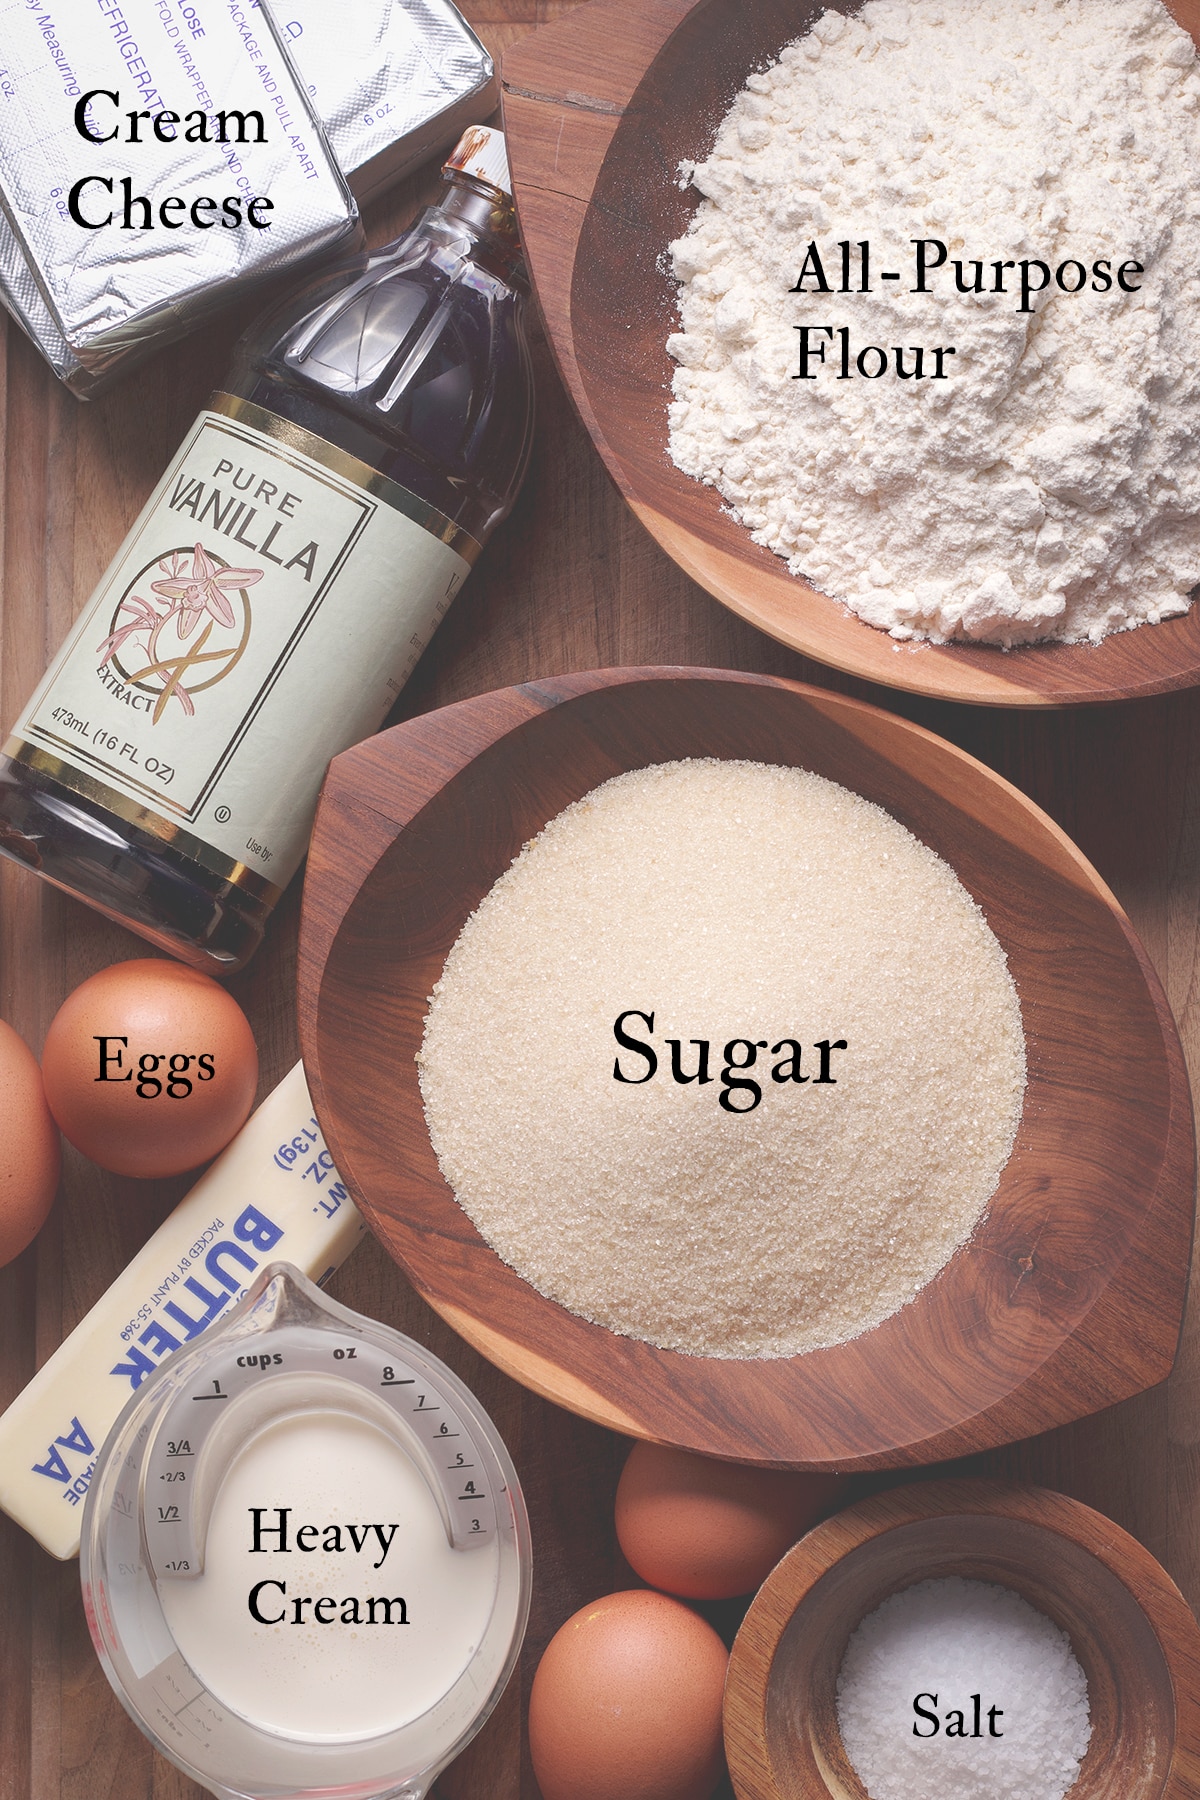 All the ingredients you need to make New York Cheesecake.